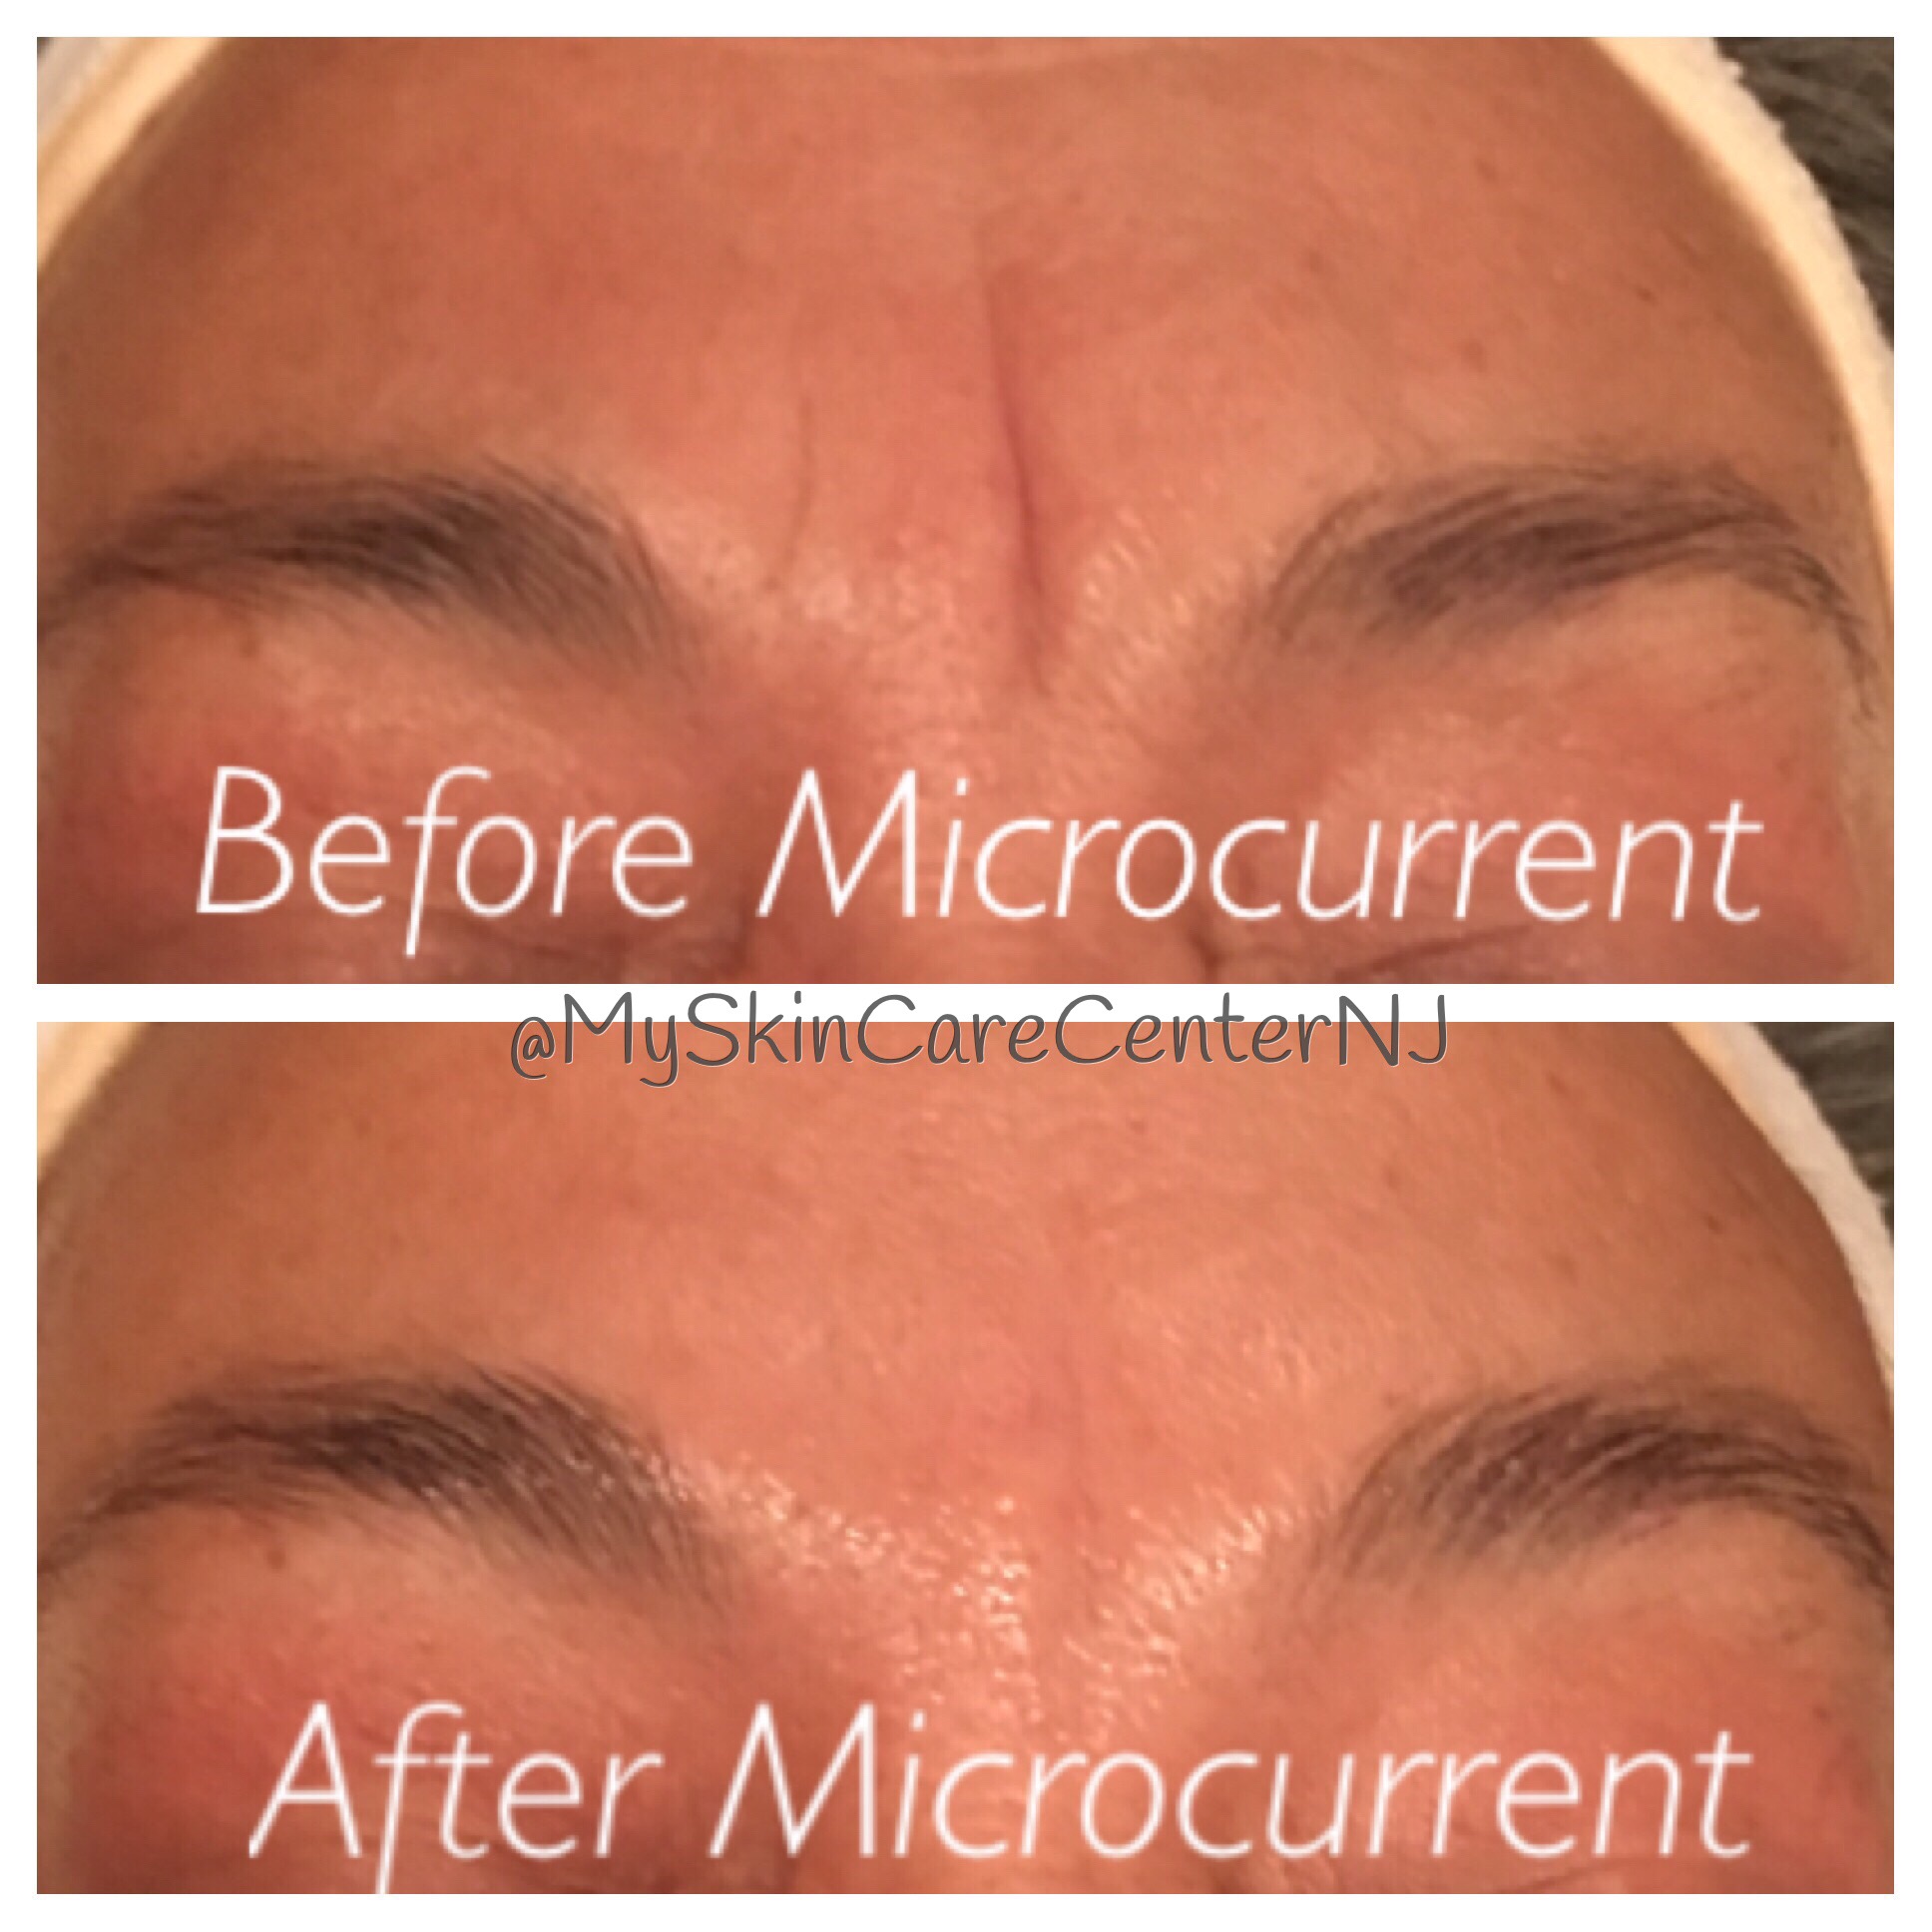 after 1 Microcurrent Treatments